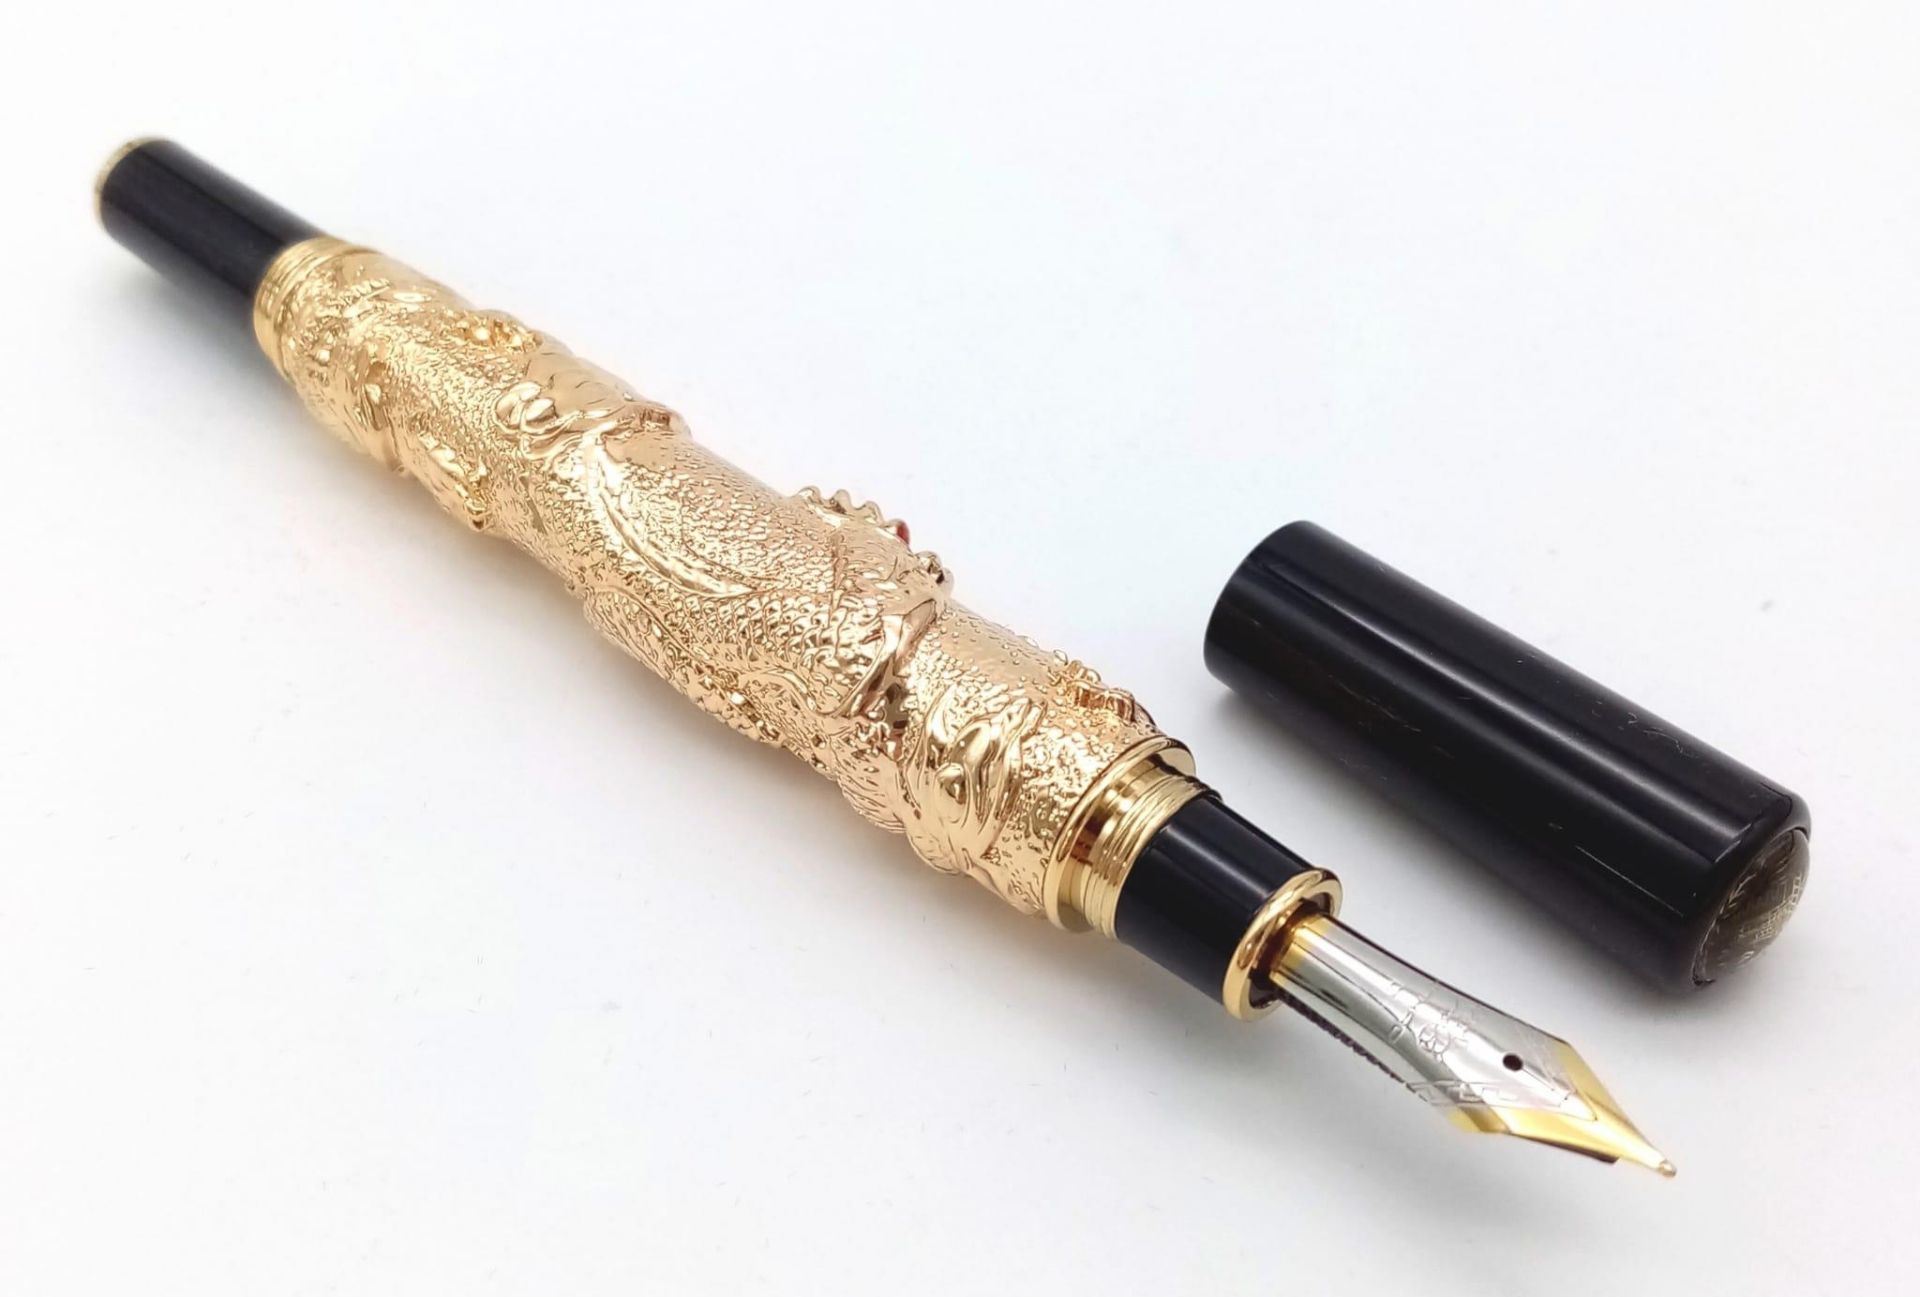 A very satisfactory to handle, heavy (70.8 g.) fountain pen with a Chinese Dragon featuring red